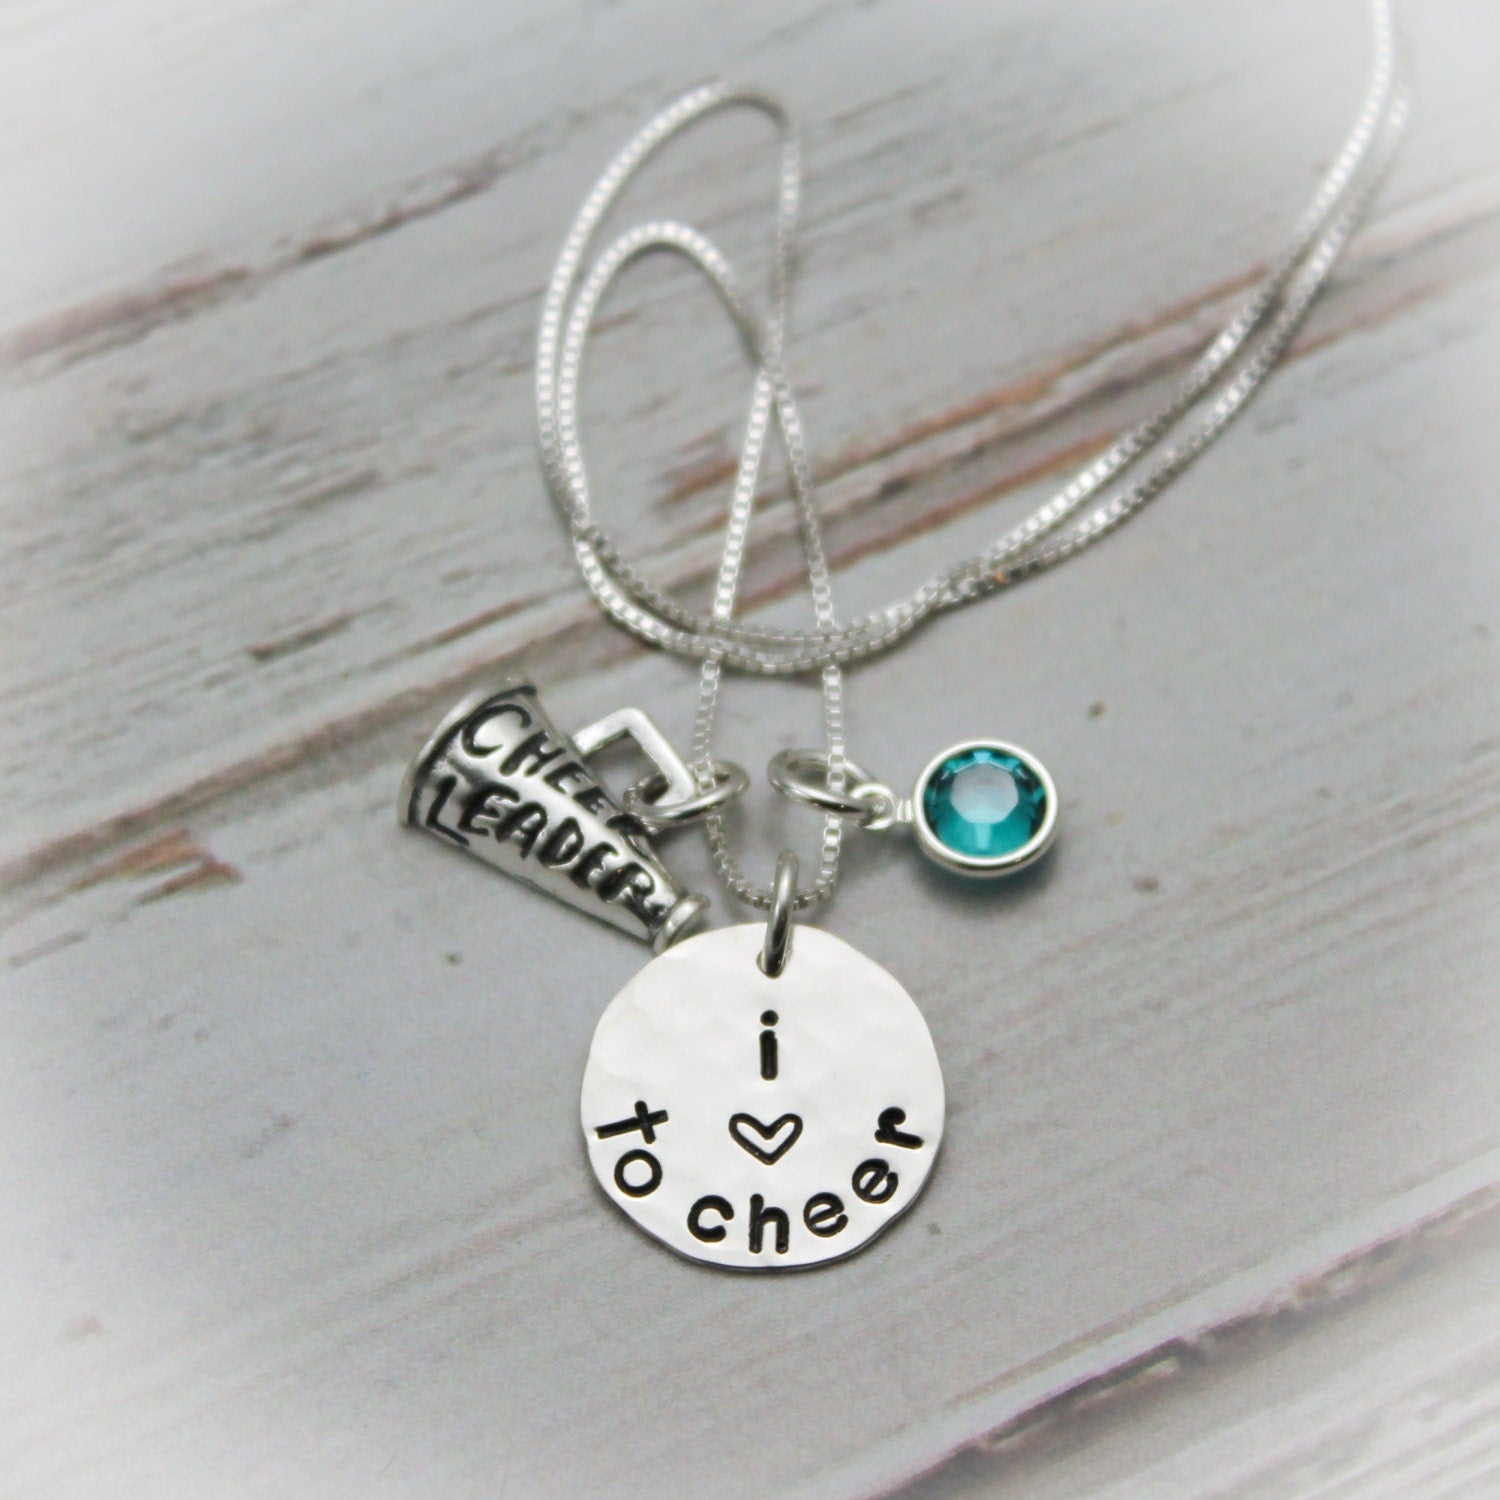 Cheerleader Personalized Necklace,  Megaphone Necklace, Pepsquad Jewelry, Love to Cheer Necklace, Hand Stamped Necklace